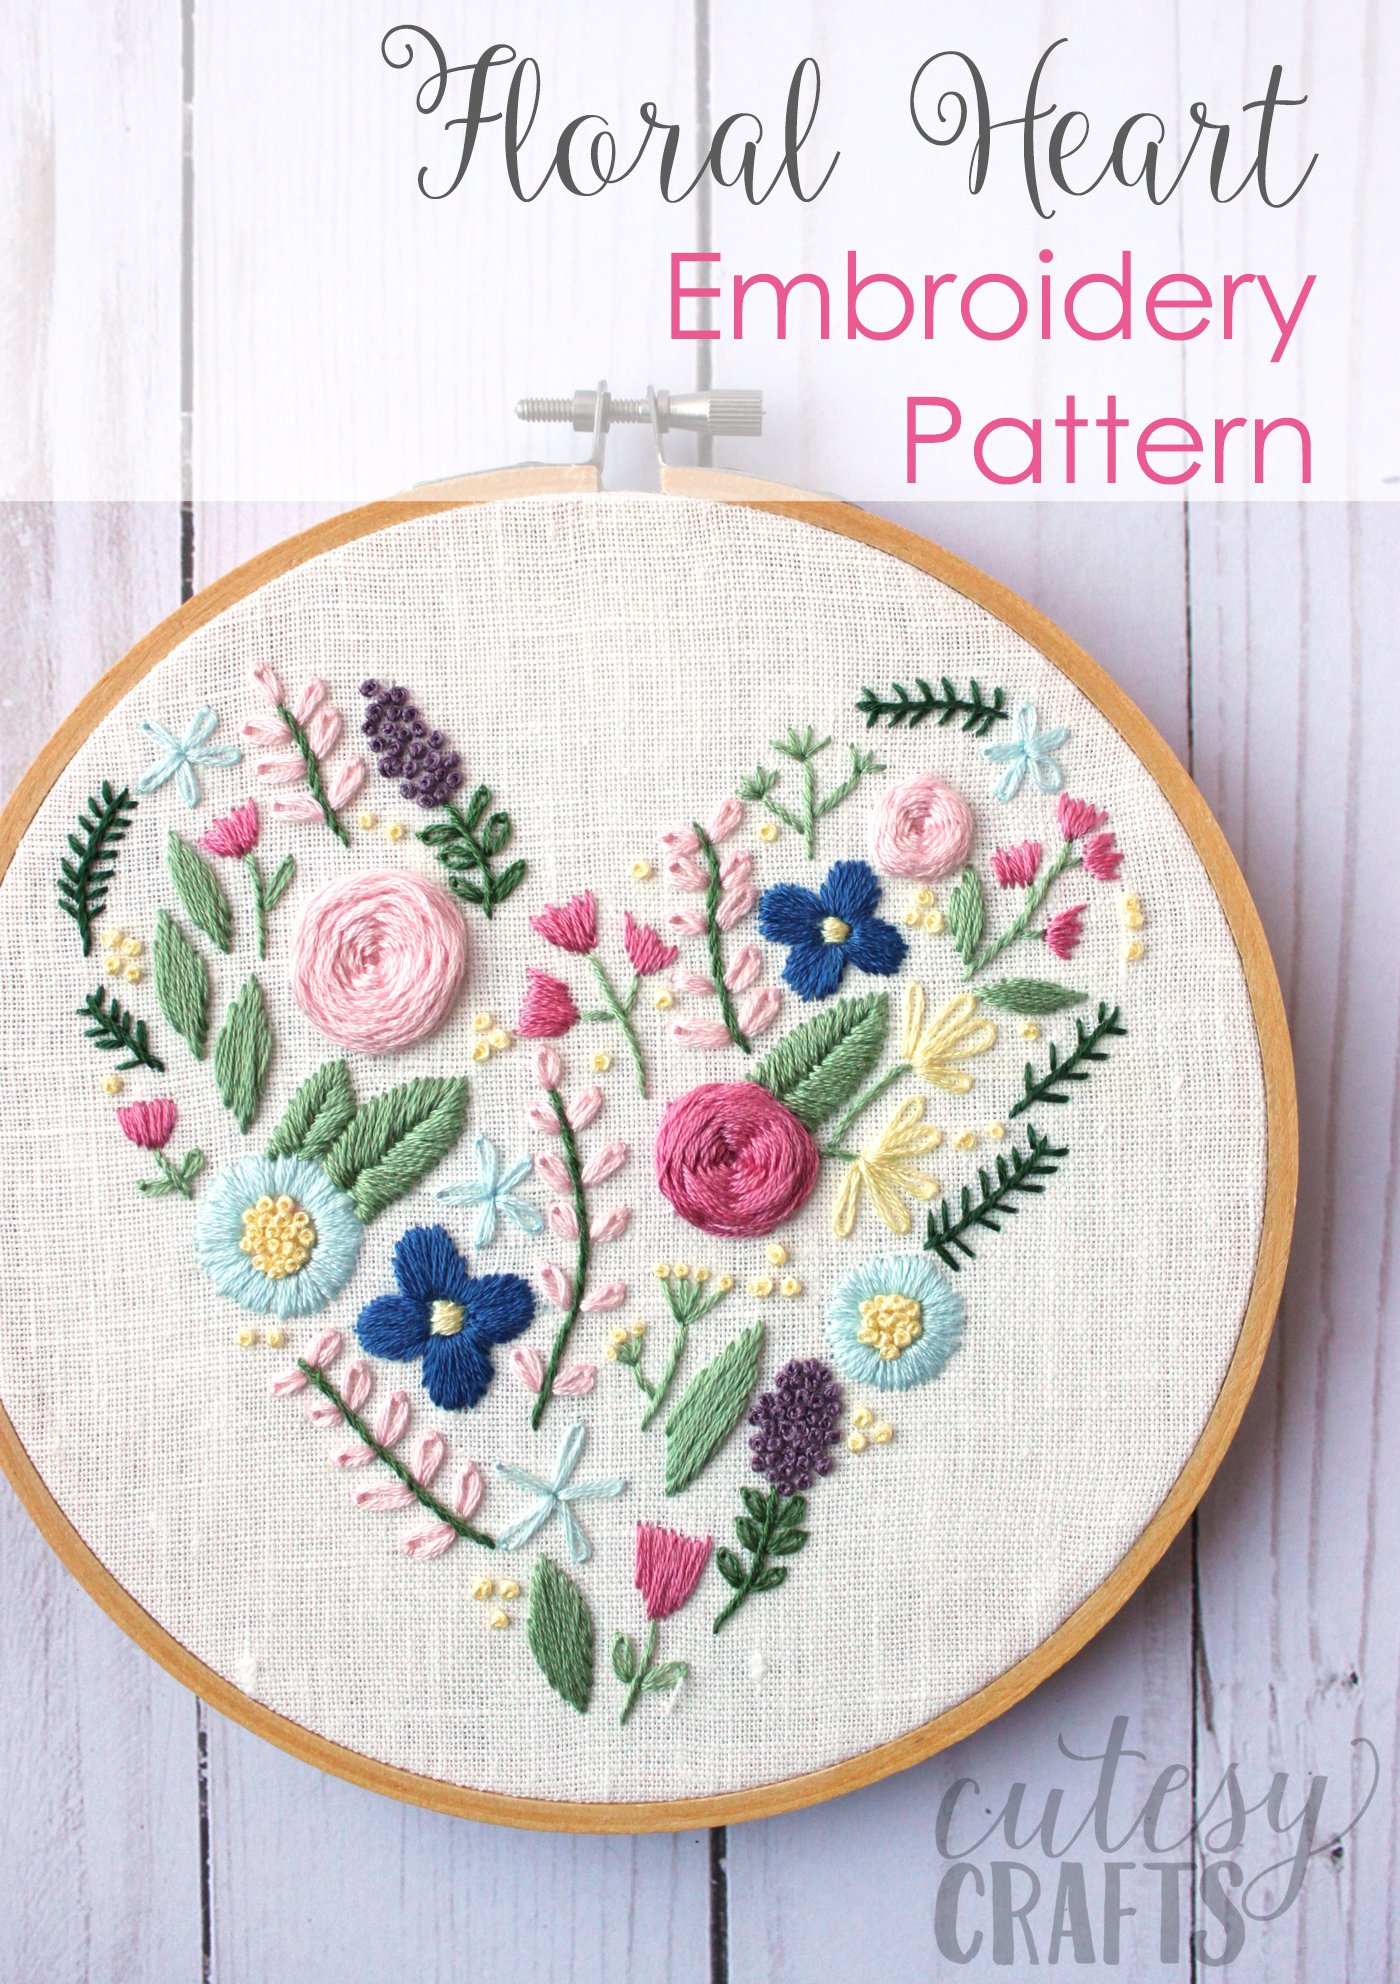 Free Embroidery Patterns Floral Heart Hand Embroidery Pattern The Polka Dot Chair